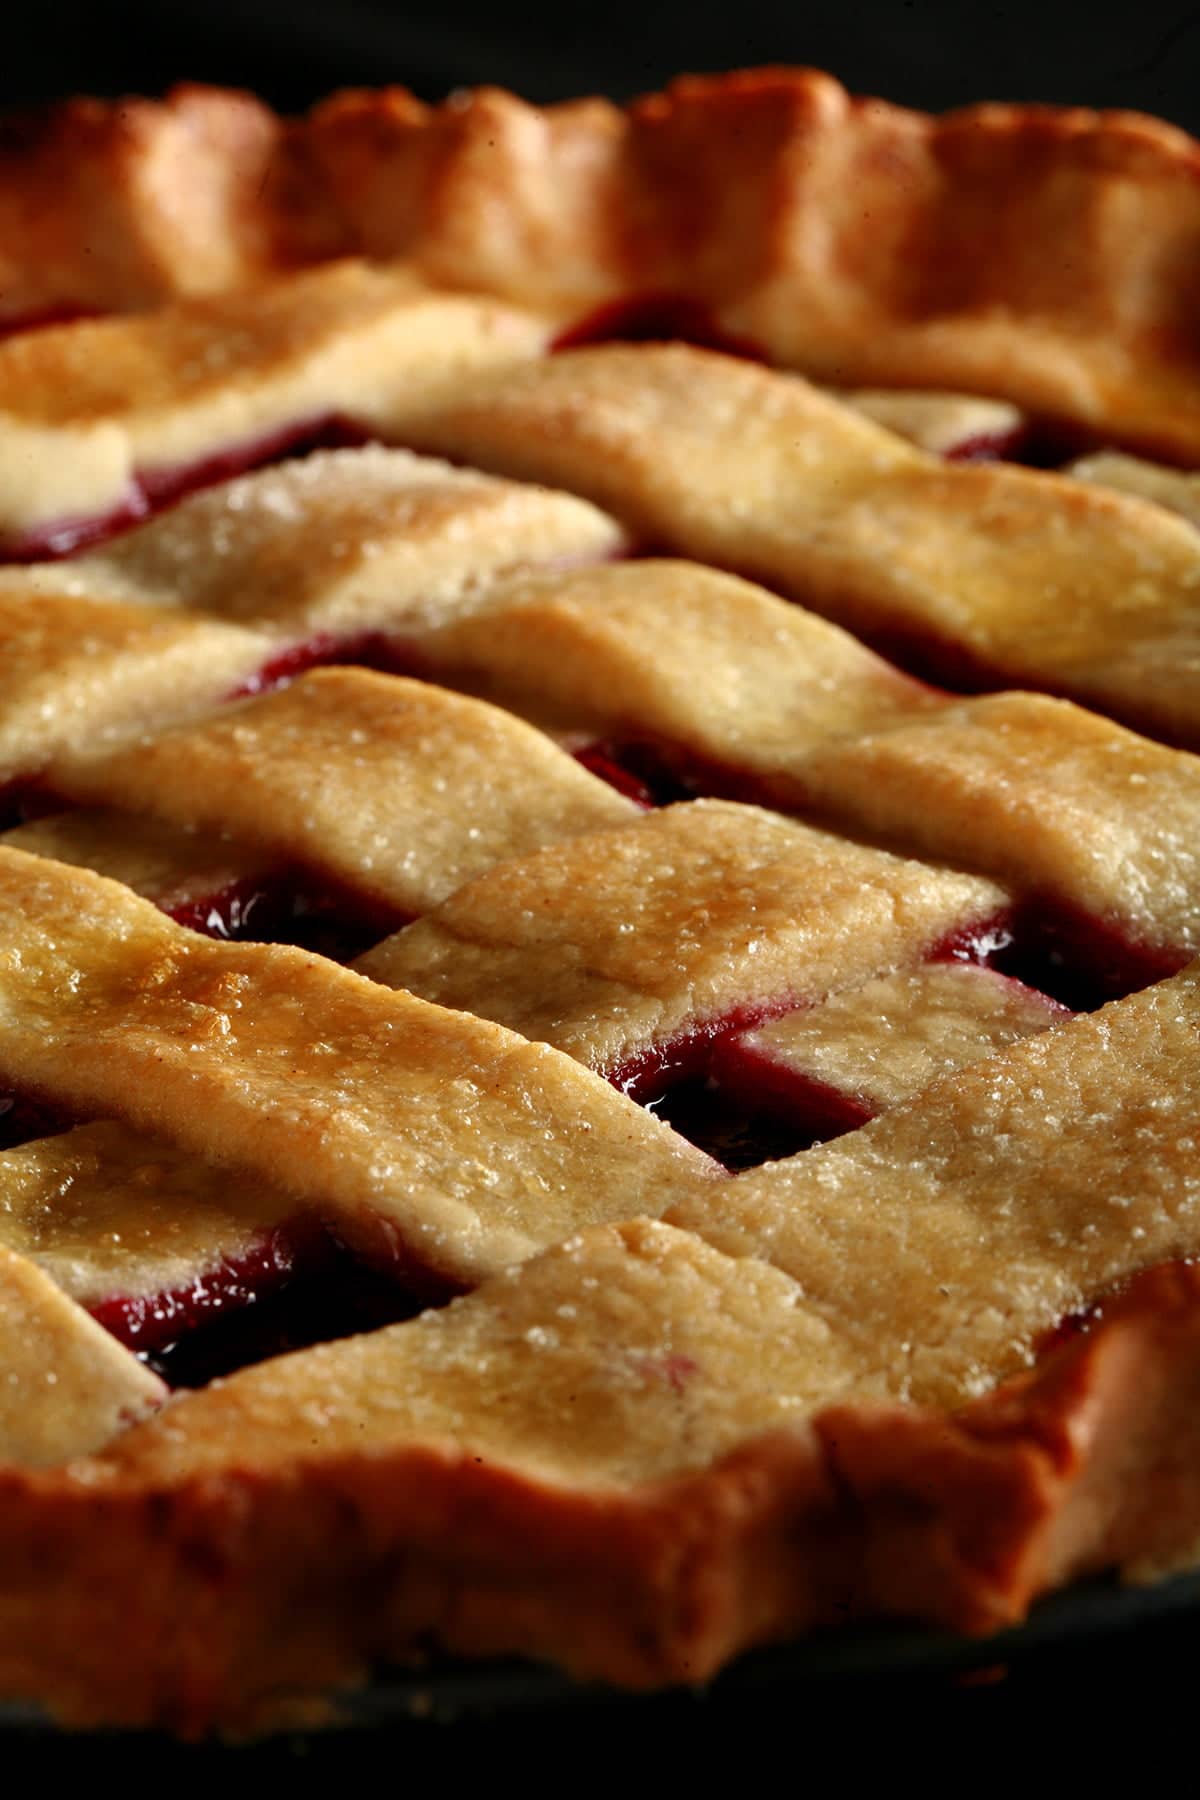 A close up view of a partridgeberry pie with a lattice crust.